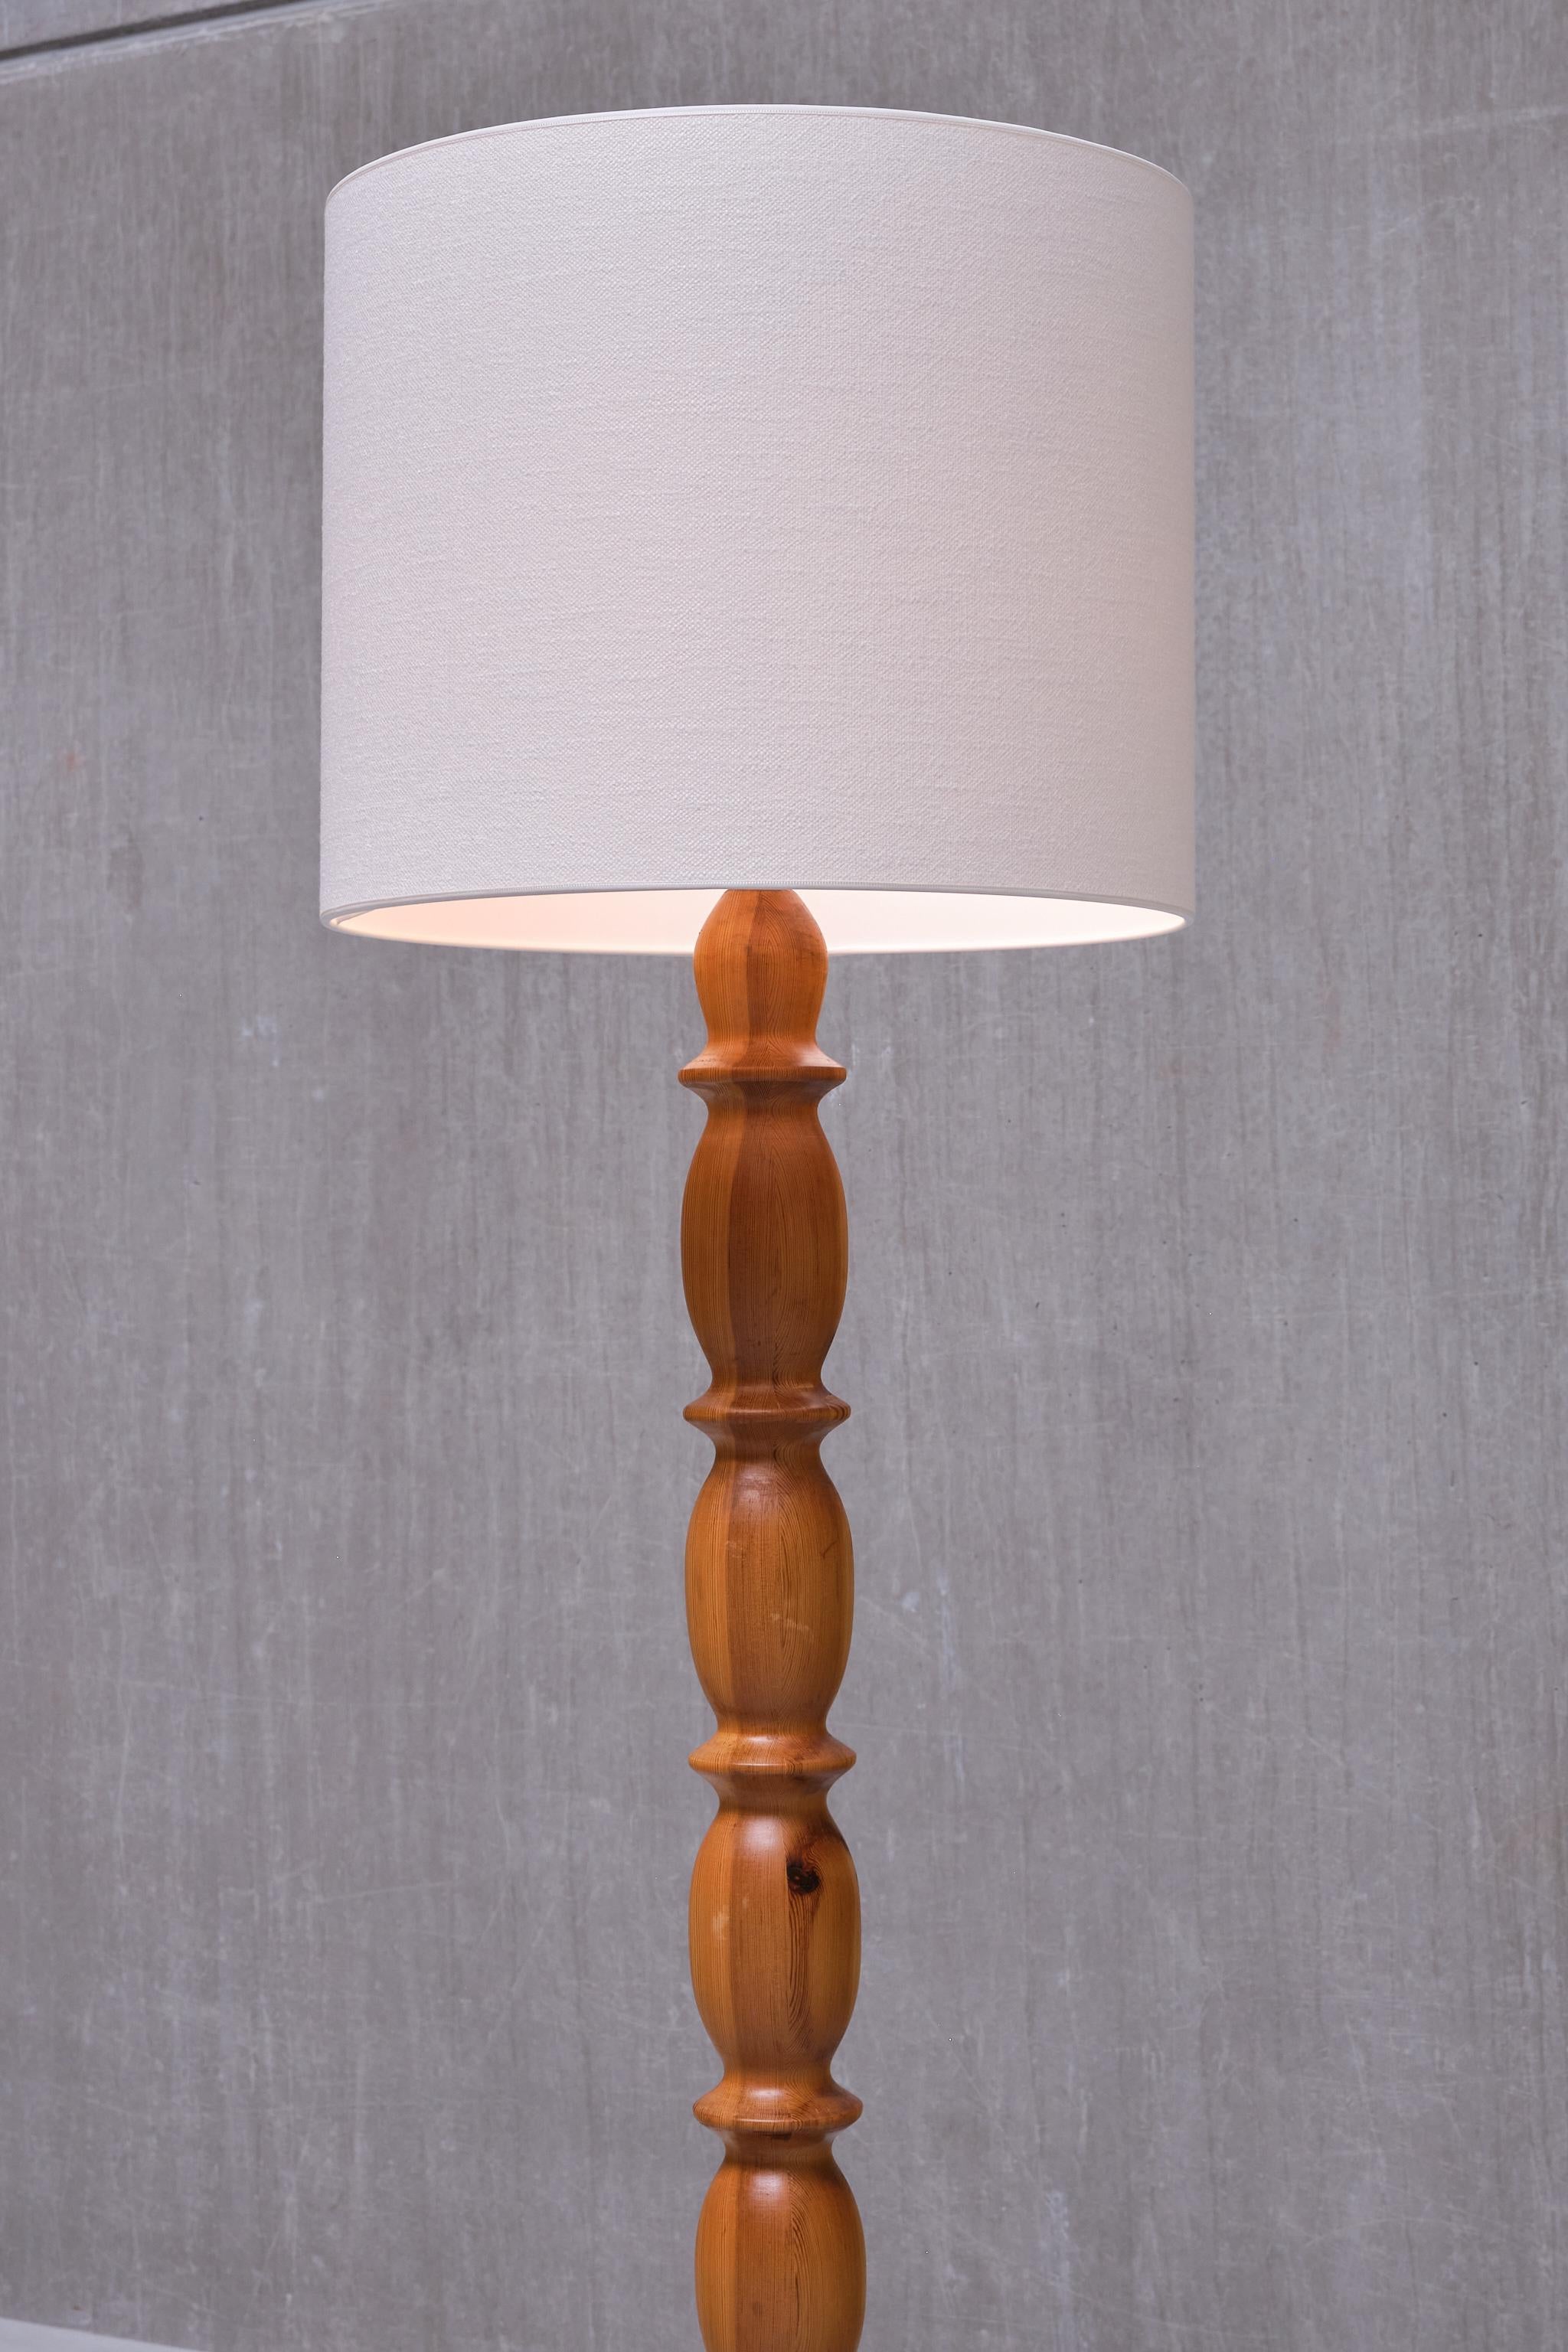 Swedish Modern Floor Lamp in Carved Solid Pine Wood, 1960s For Sale 4